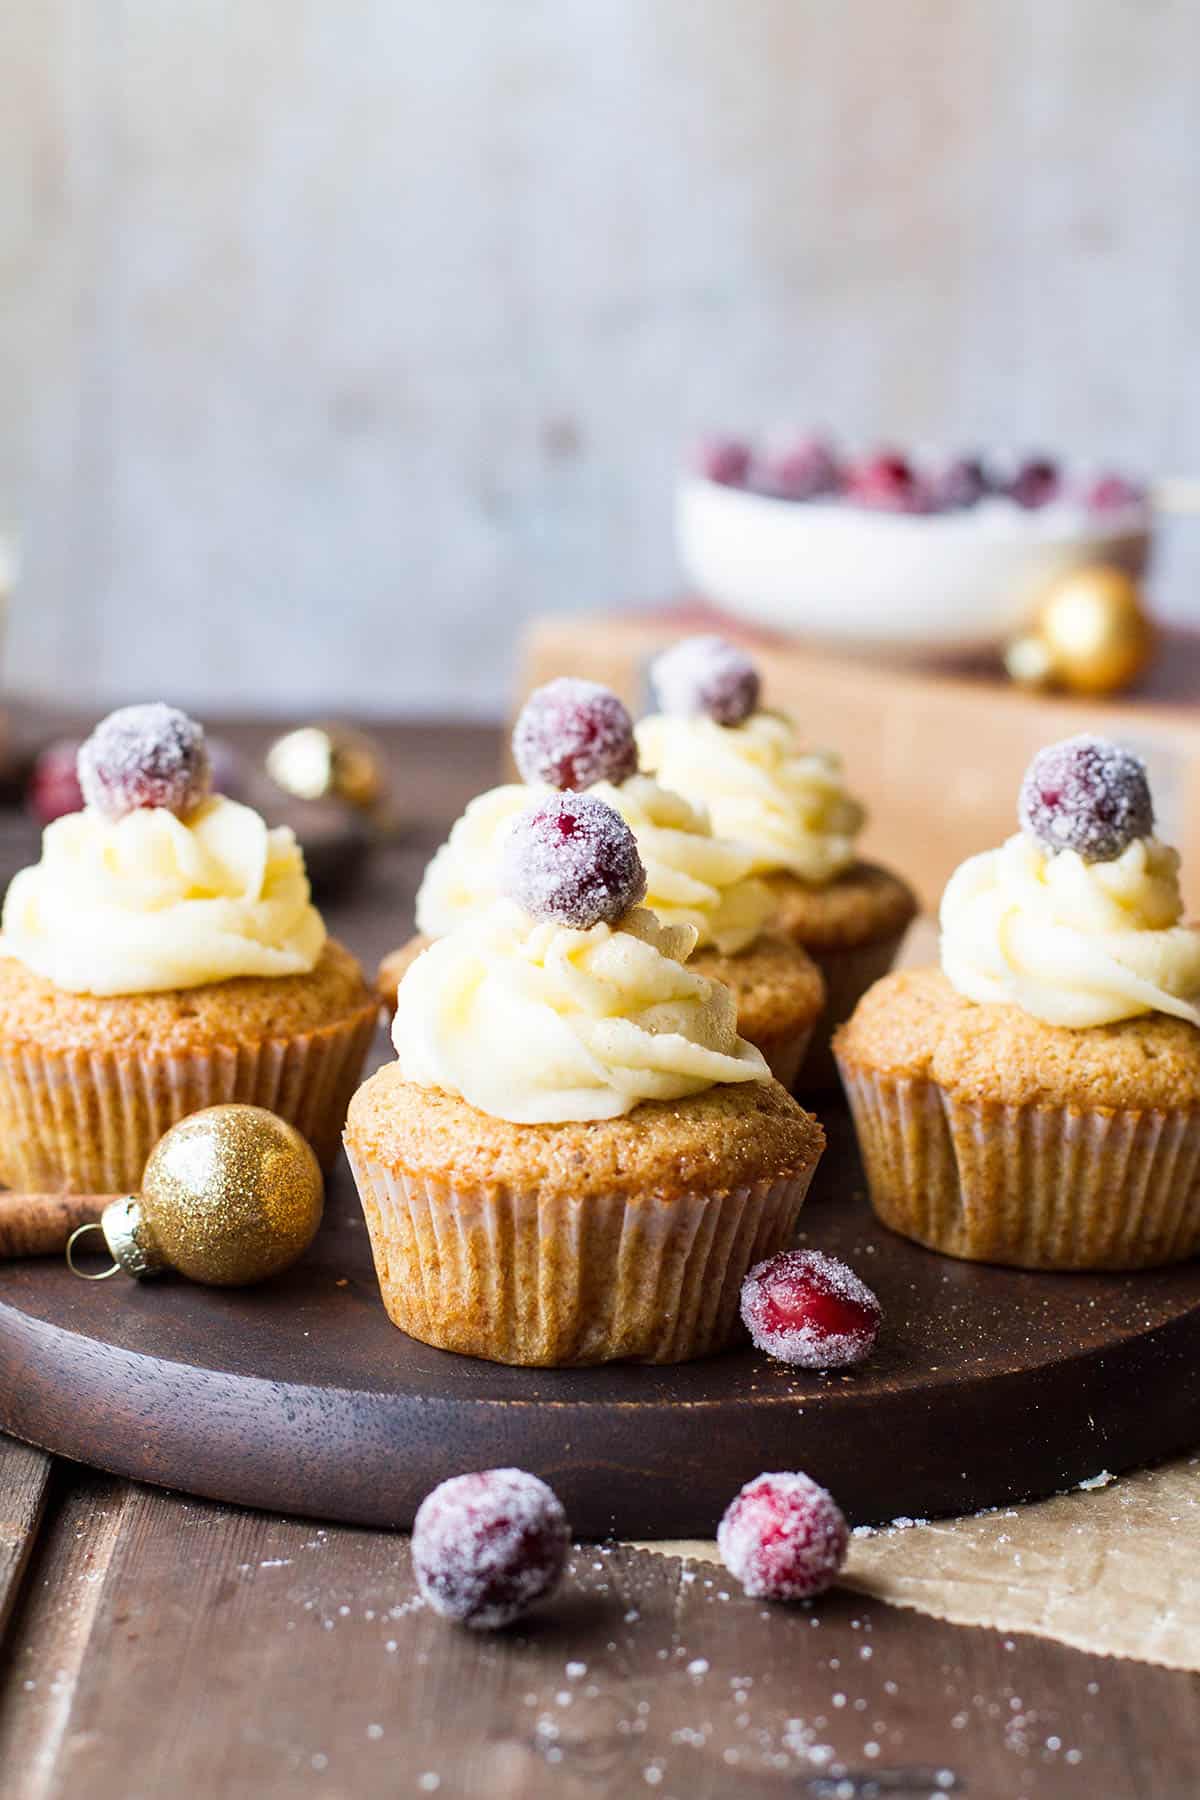 Cupcakes with white icing and sugar cranberry on a wooden plate.